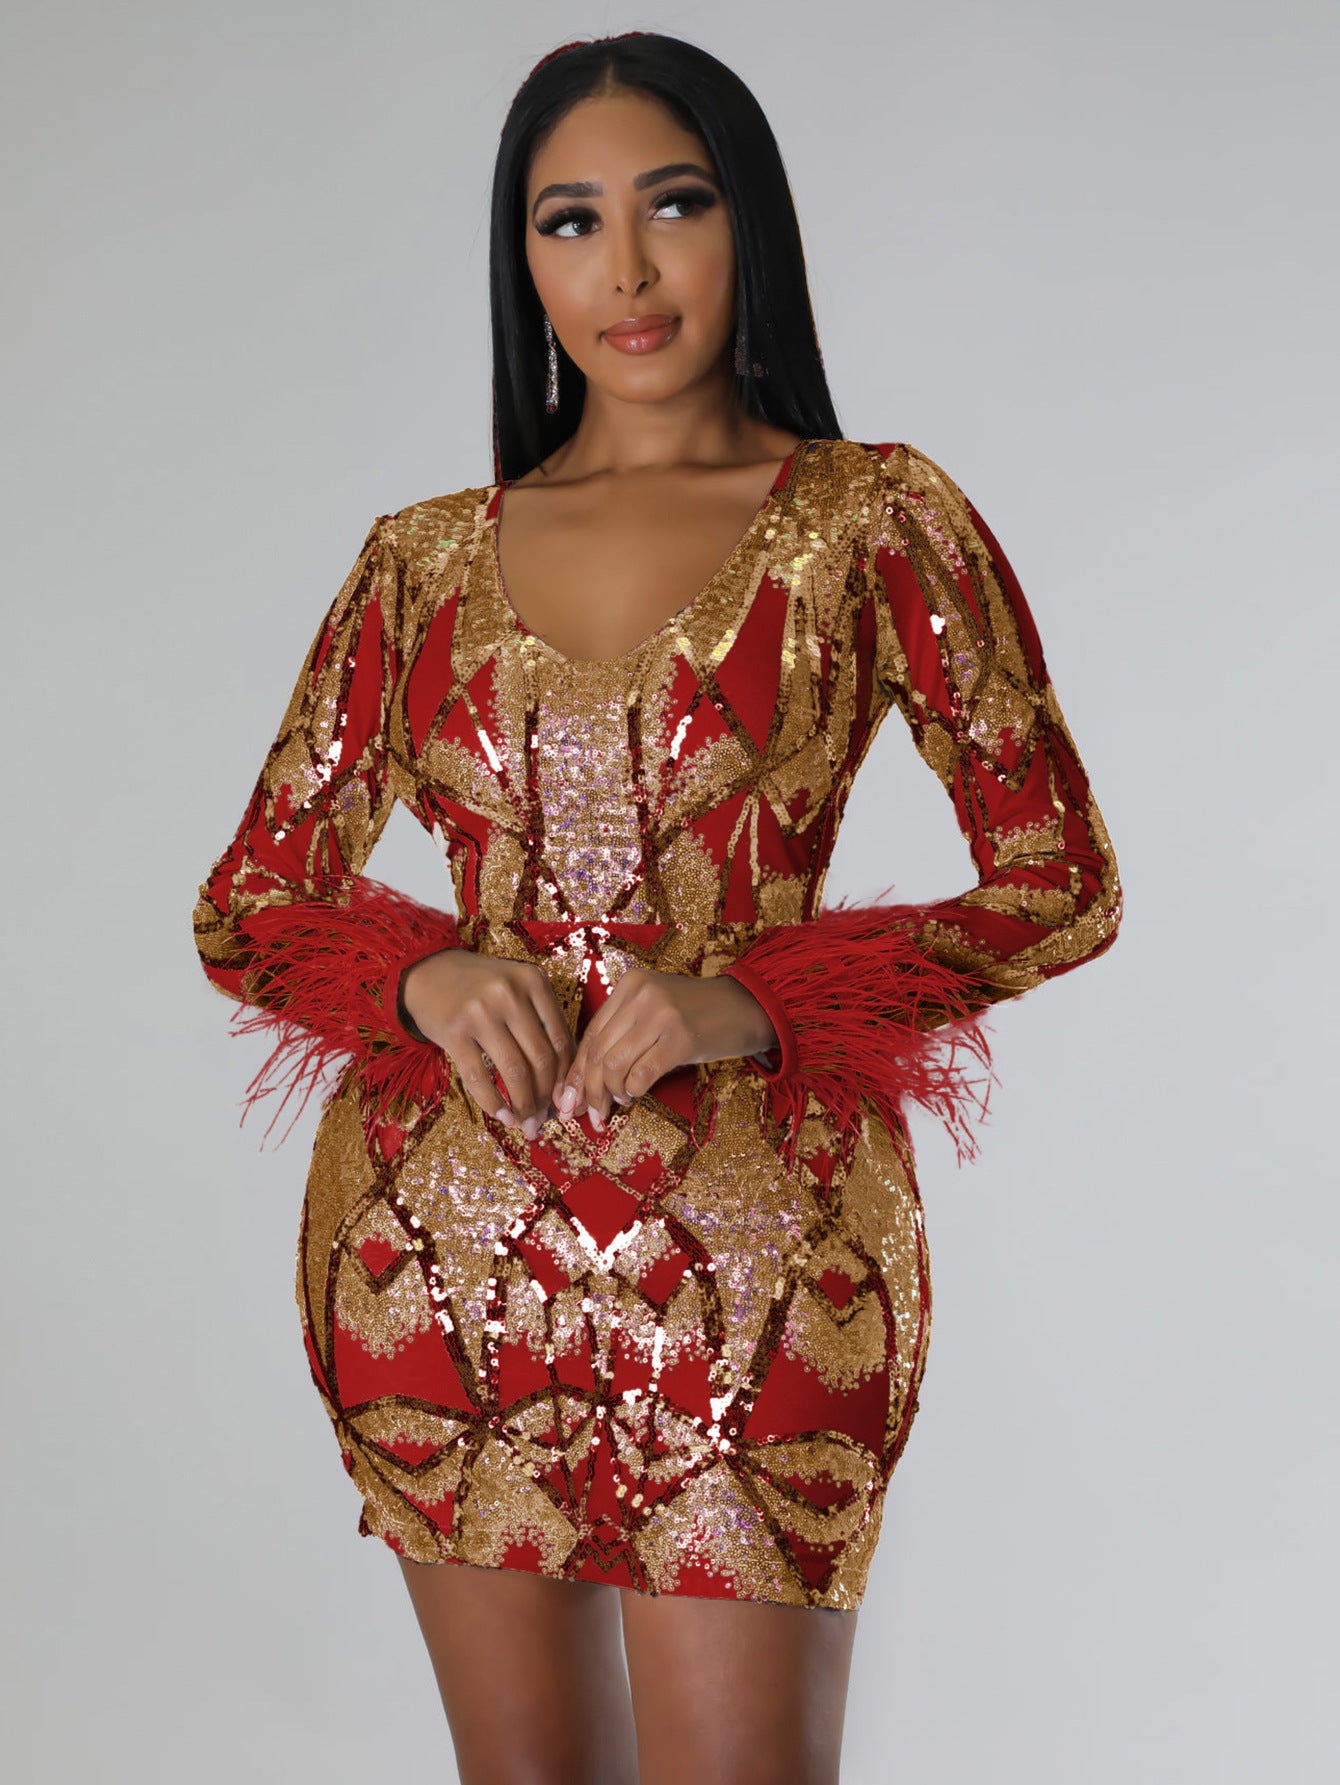 BamBam Women's V Neck Sexy Sequin Long Sleeve Cocktail Fancy Ladies Nightclub Party Dress - BamBam Clothing Clothing